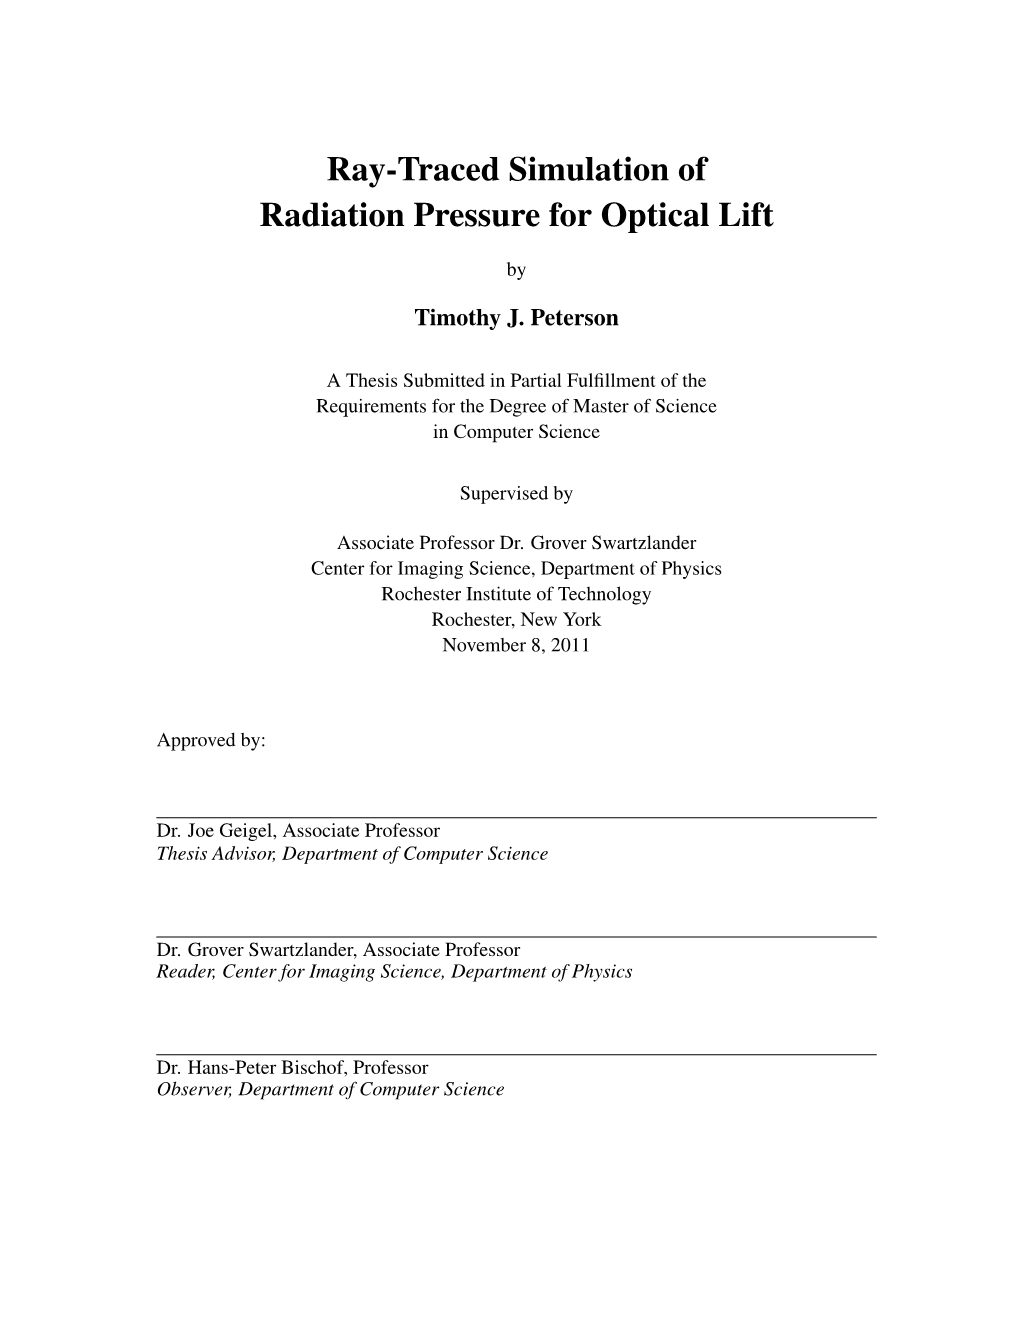 Ray-Traced Simulation of Radiation Pressure for Optical Lift